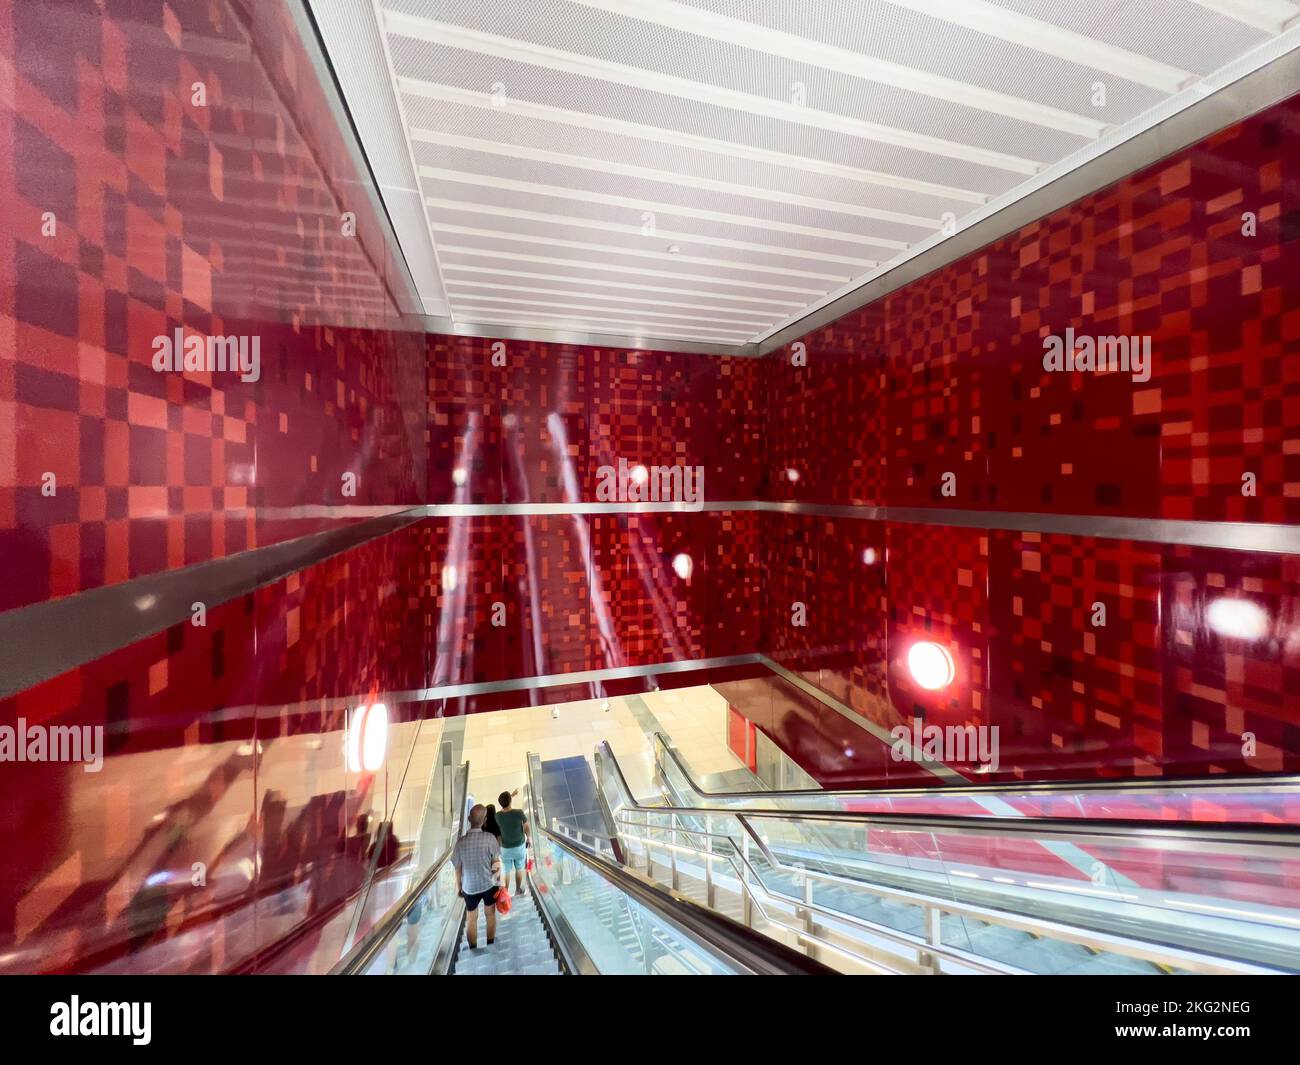 Commuters travel deep down a long escalator within a red colour wall interior design. Stock Photo